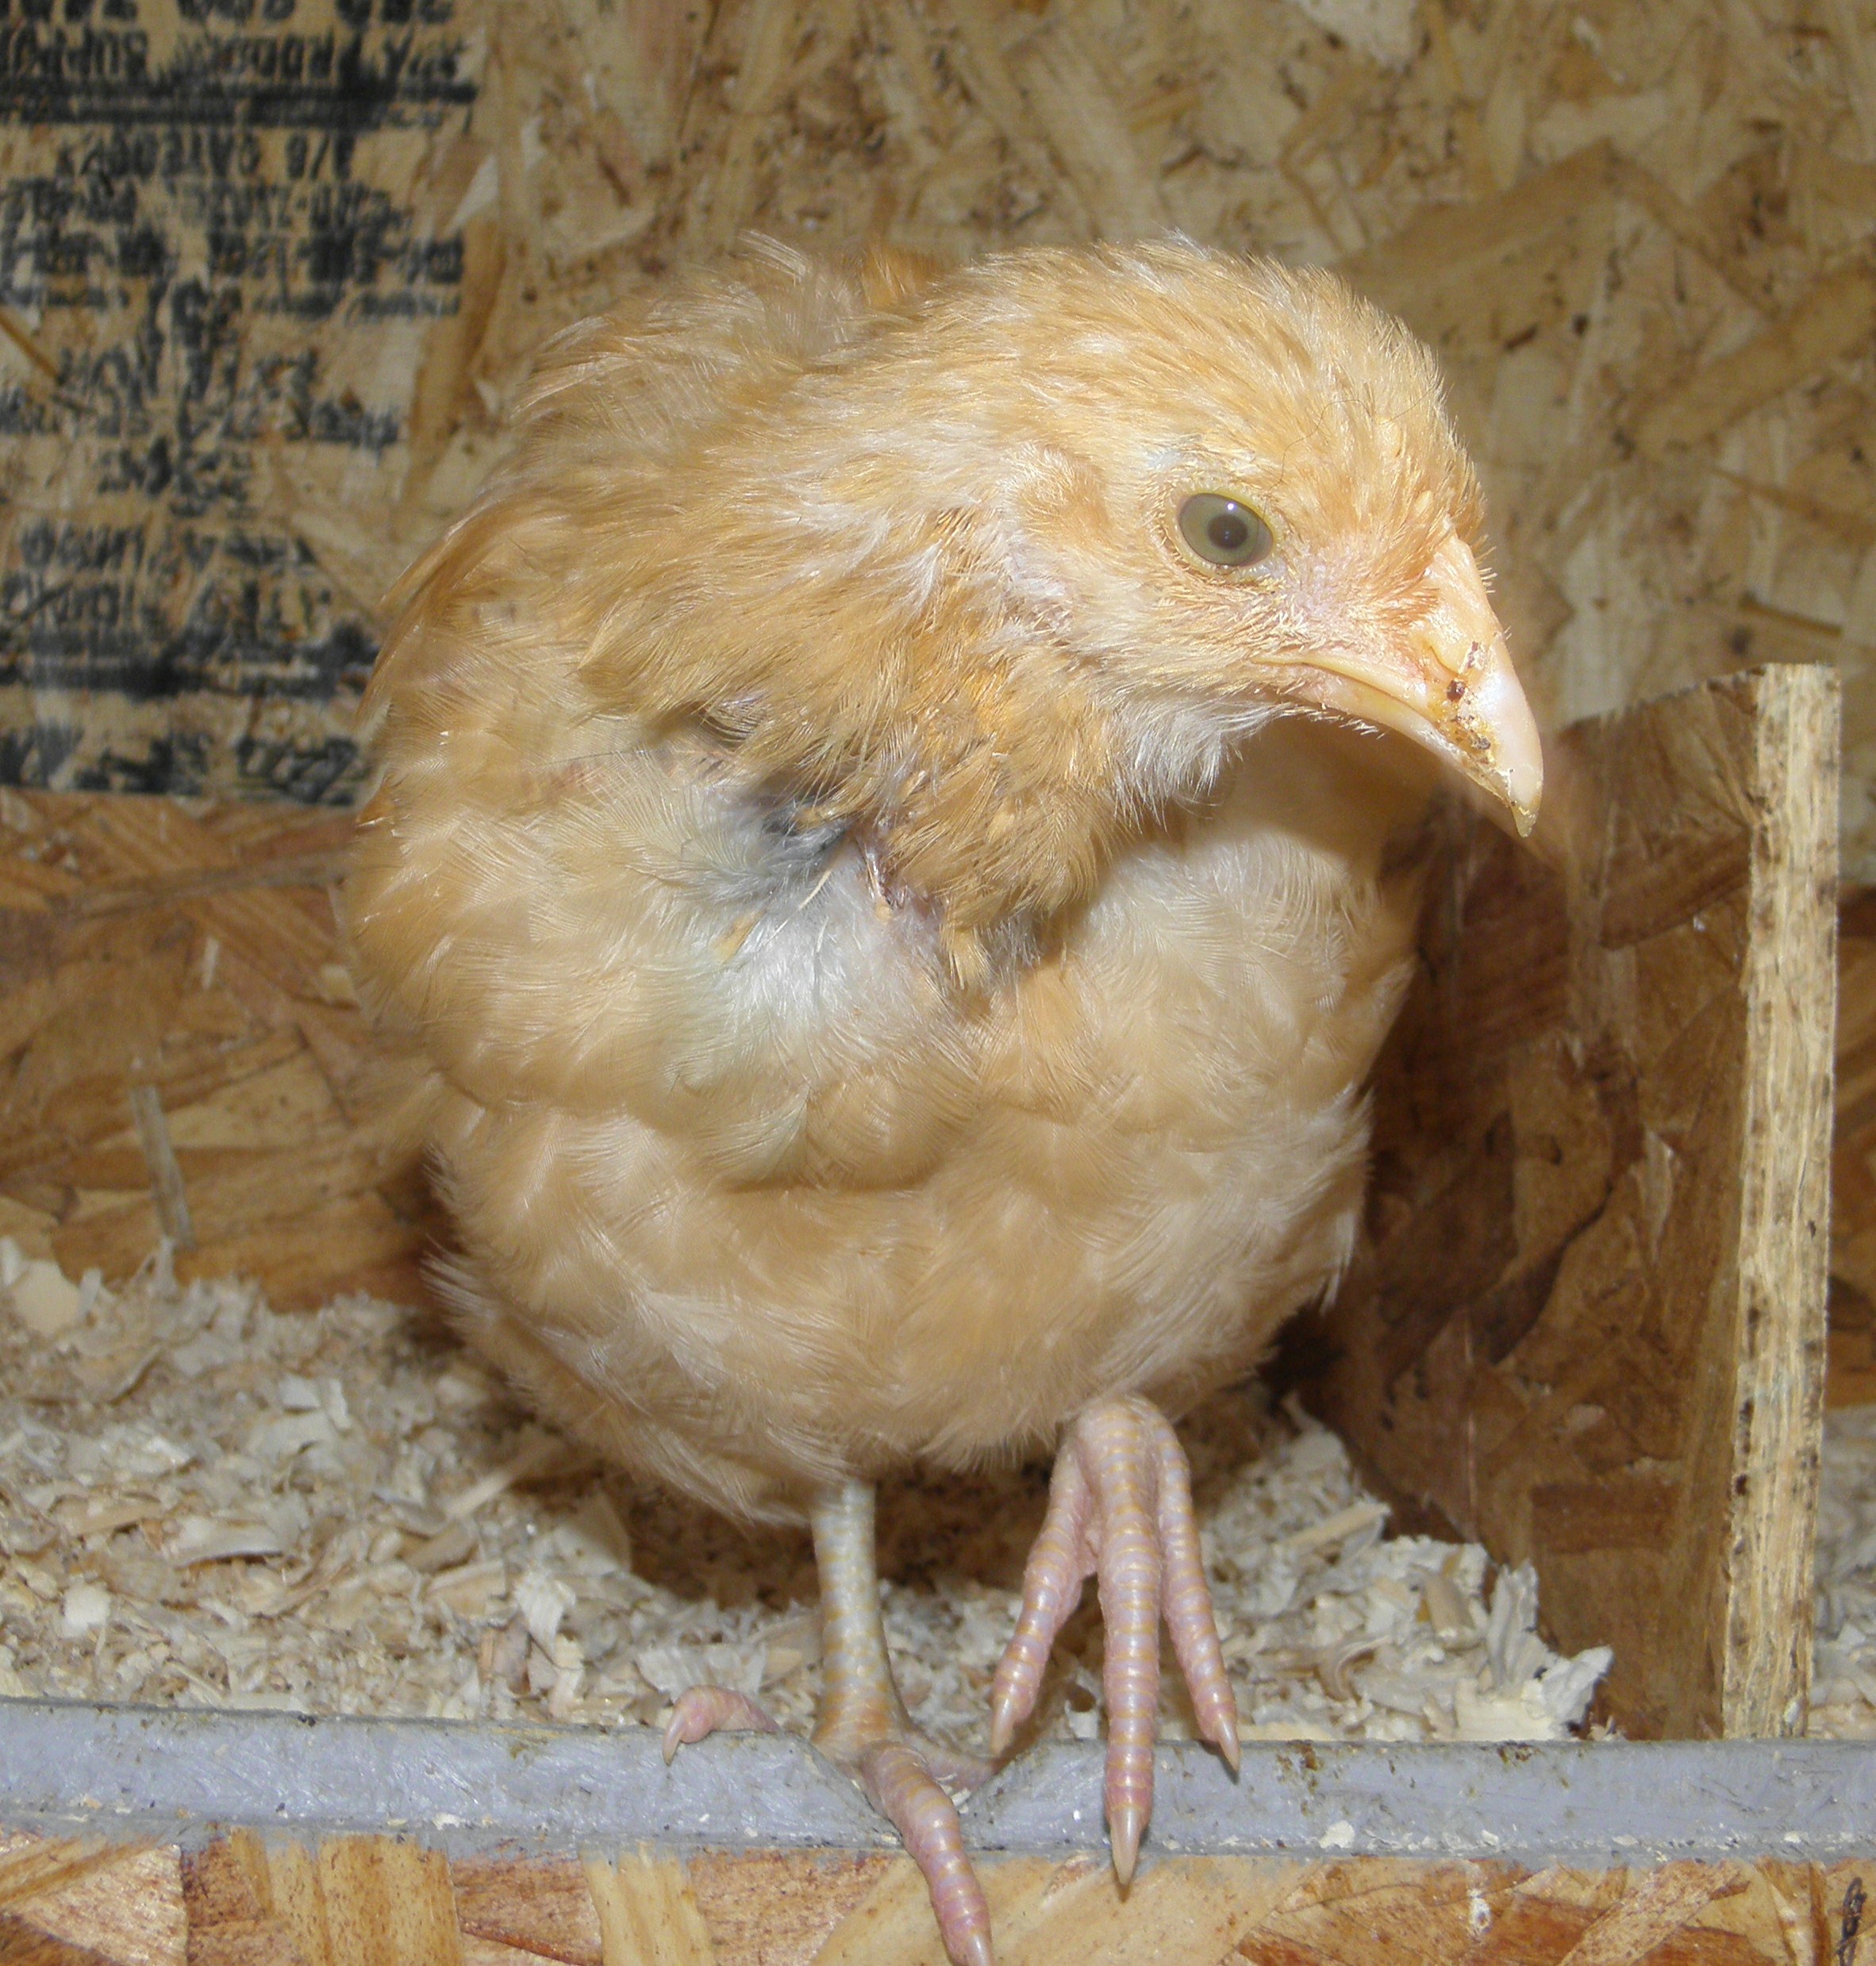 This is my Buff Orpington Goldielocks born April 30th 2012.  She is the sweetest, smartest one in my flock.  She loves to be held, knows her name, comes when called and tries to climb on my shoulder like a parrot! She also "mothered" Annabell my little Ancuna who sadly passed away.